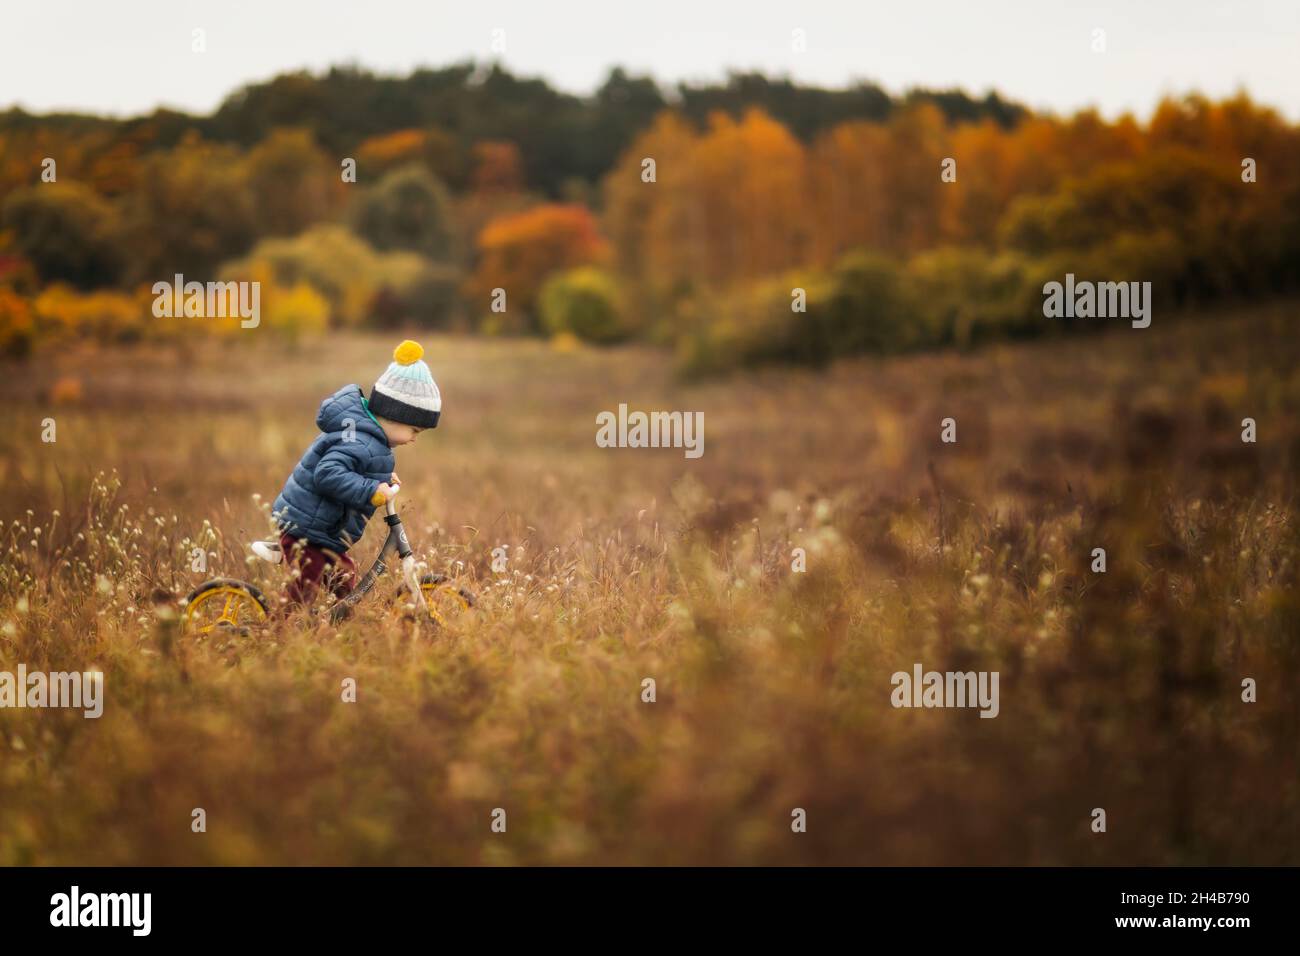 Small child in blue jacket and hat riding his push bike during a Stock Photo